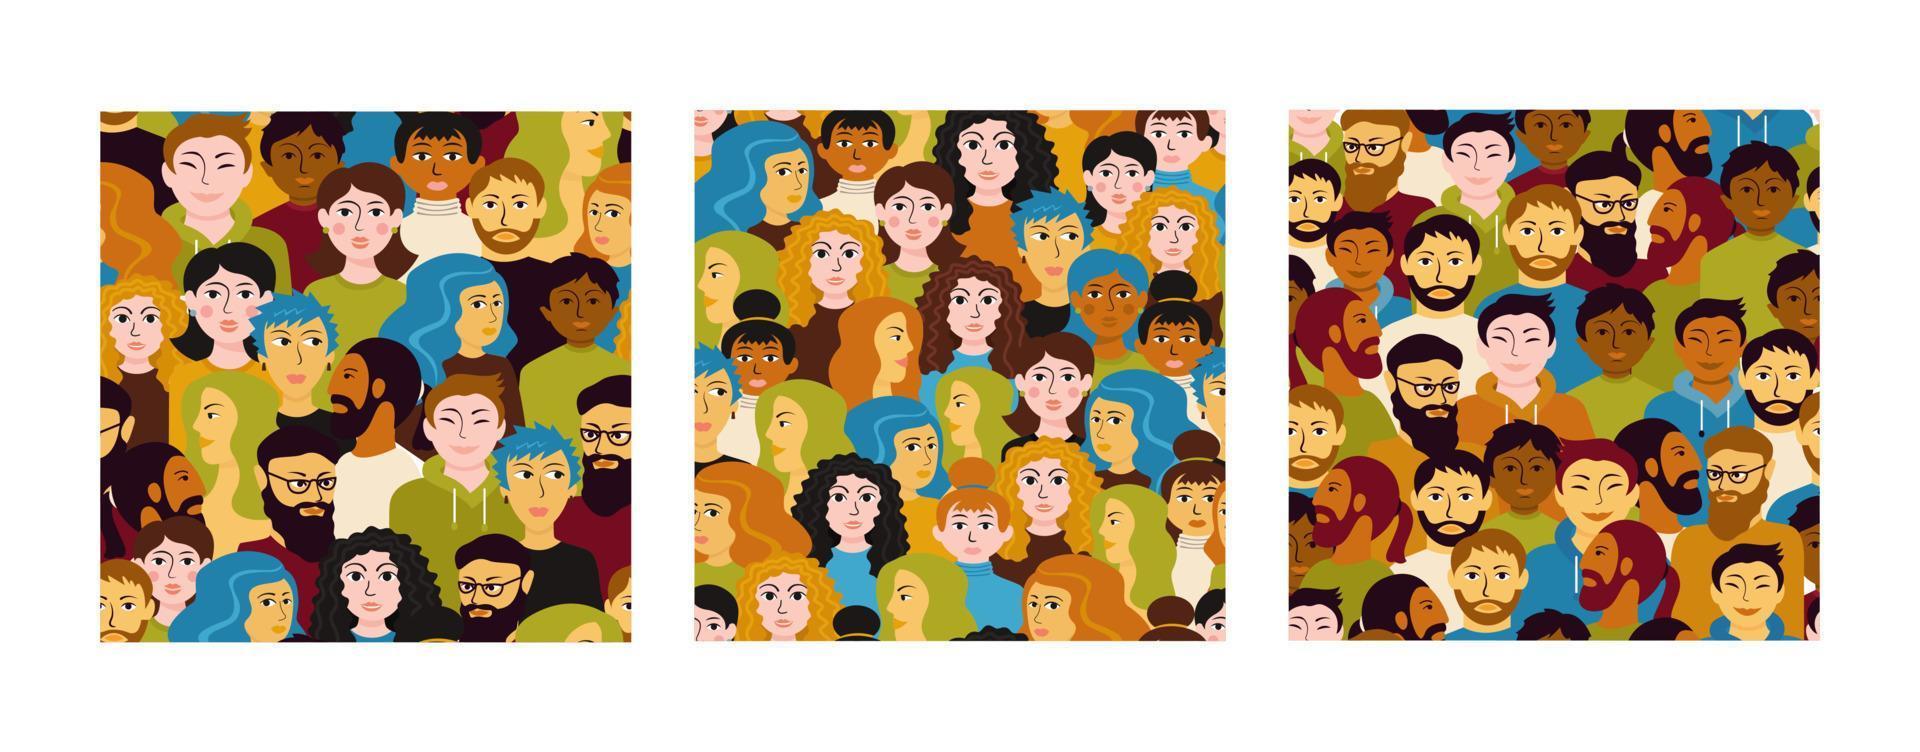 Crowd of people seamless pattern set. Men and women different nationalities funny sad. vector